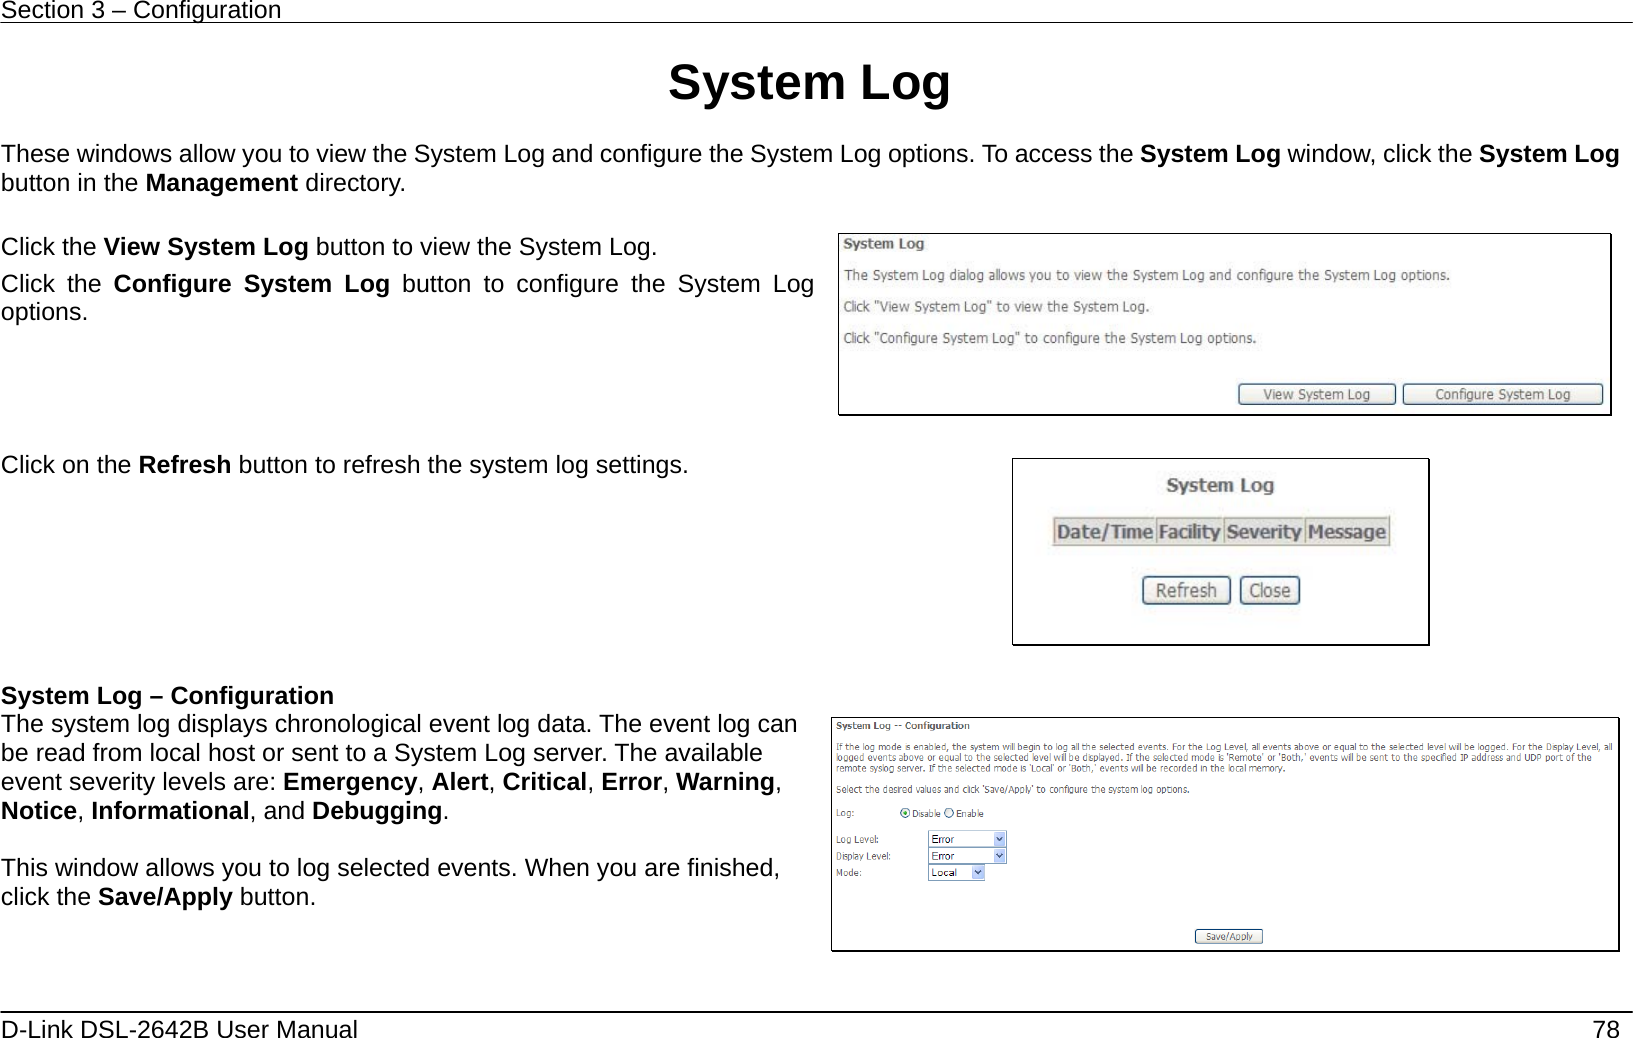 Section 3 – Configuration   D-Link DSL-2642B User Manual    78 System Log  These windows allow you to view the System Log and configure the System Log options. To access the System Log window, click the System Log button in the Management directory.  Click the View System Log button to view the System Log. Click the Configure System Log button to configure the System Log options.     Click on the Refresh button to refresh the system log settings.   System Log – Configuration The system log displays chronological event log data. The event log can be read from local host or sent to a System Log server. The available event severity levels are: Emergency, Alert, Critical, Error, Warning, Notice, Informational, and Debugging.  This window allows you to log selected events. When you are finished, click the Save/Apply button.    